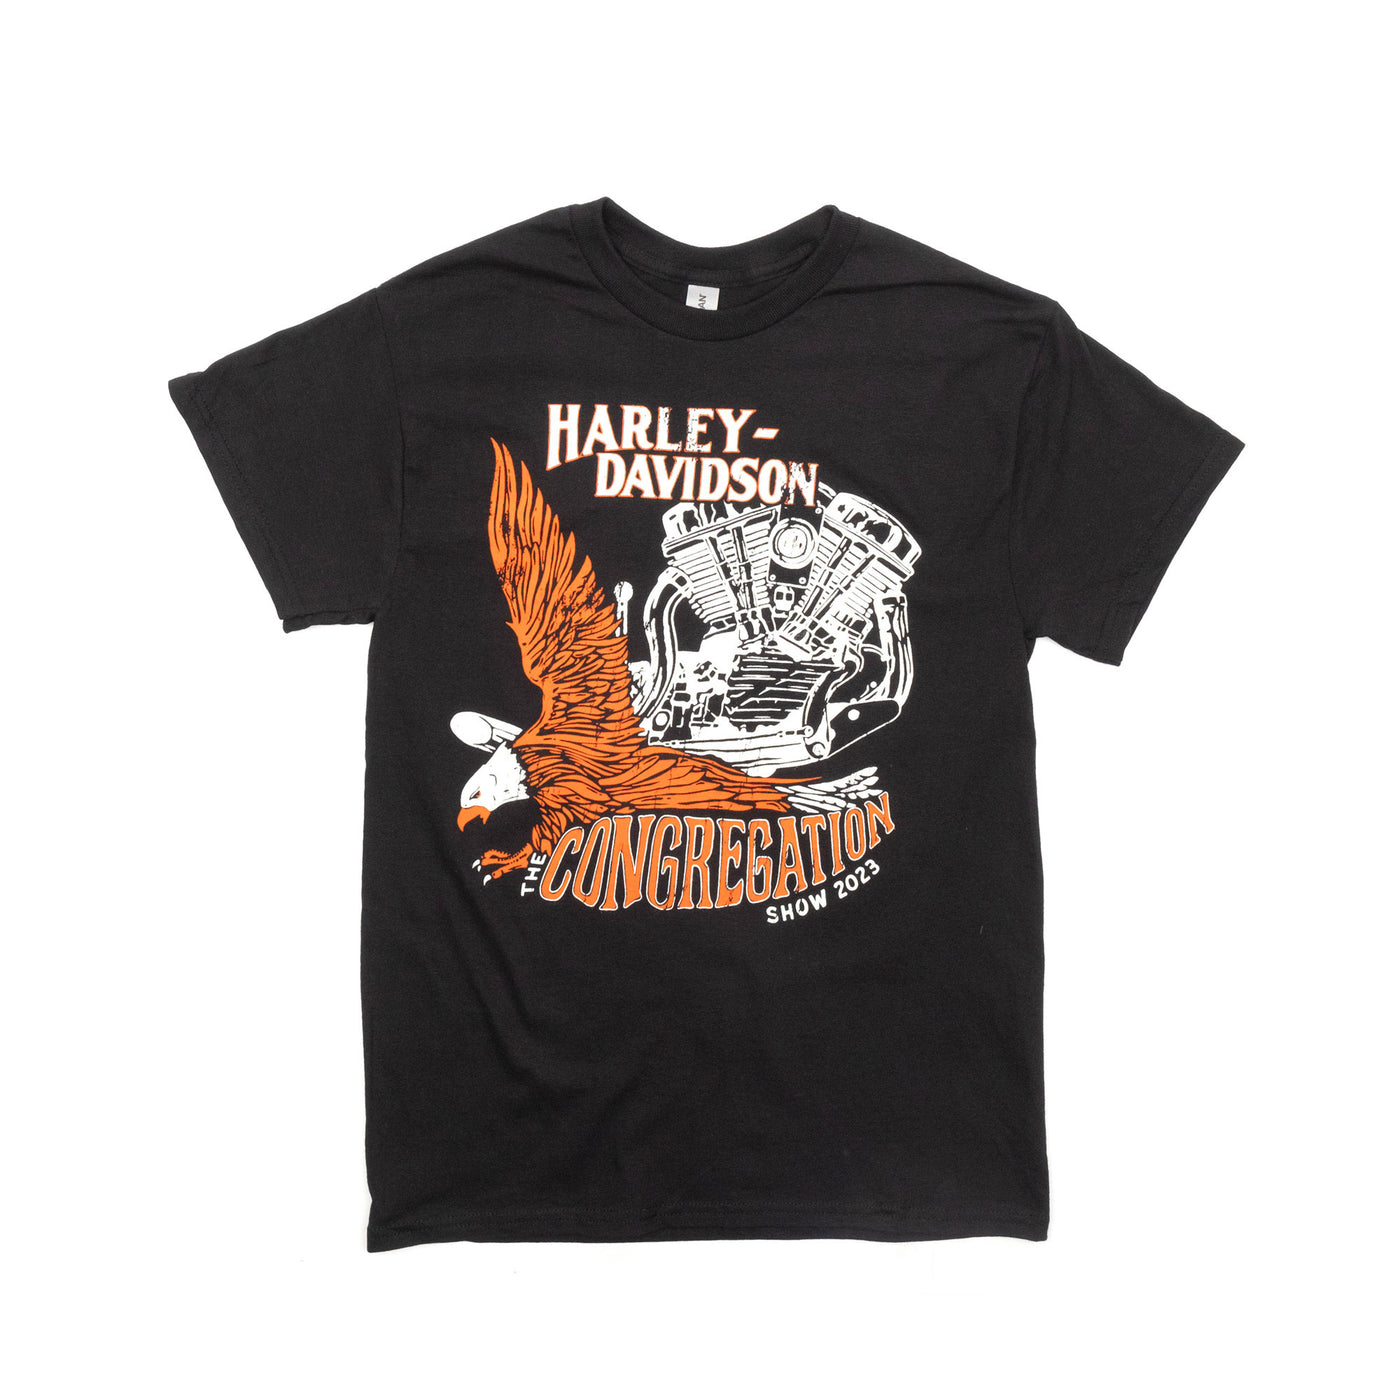 The Congregation Show 2023 Tee - Black